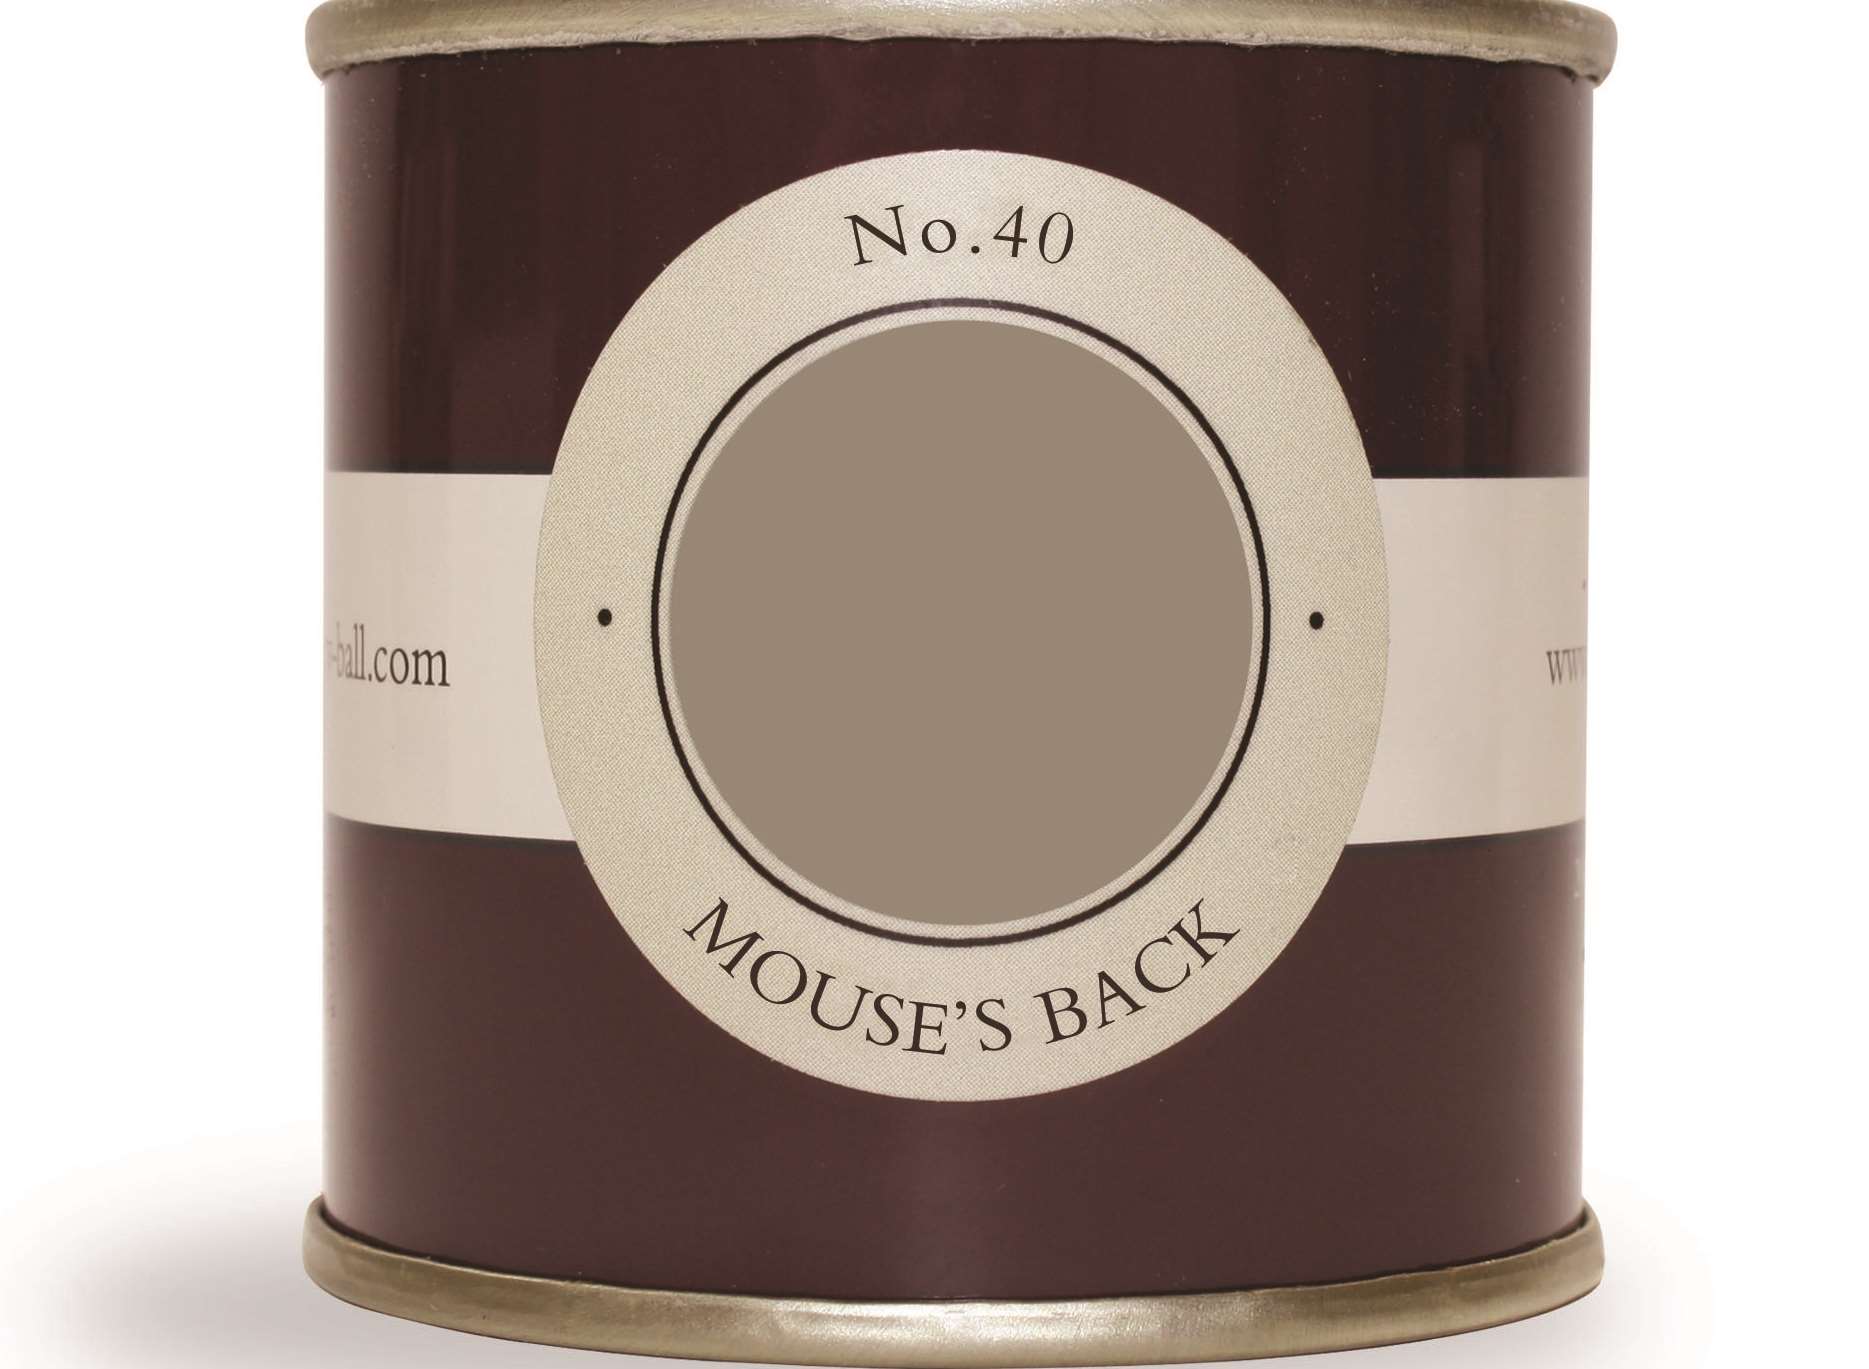 Farrow & Ball’s Wimborne White and Mouse’s Back